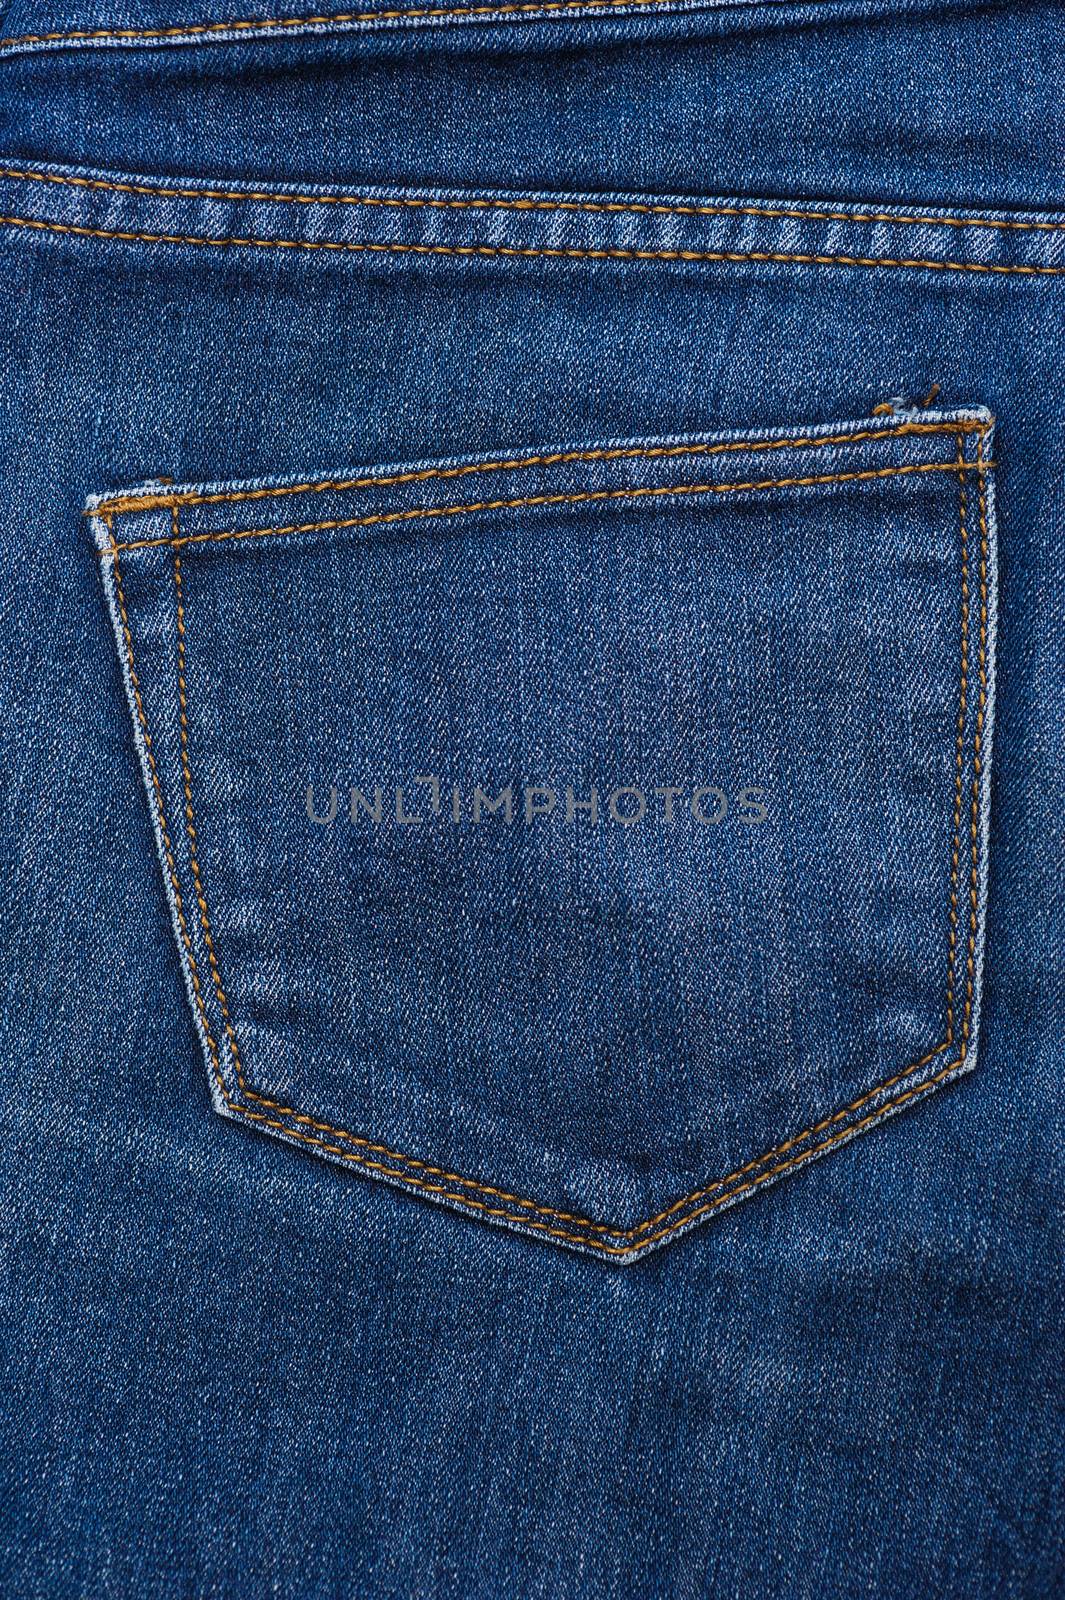 blue texture of jeans, stitching on the pants closeup by timonko